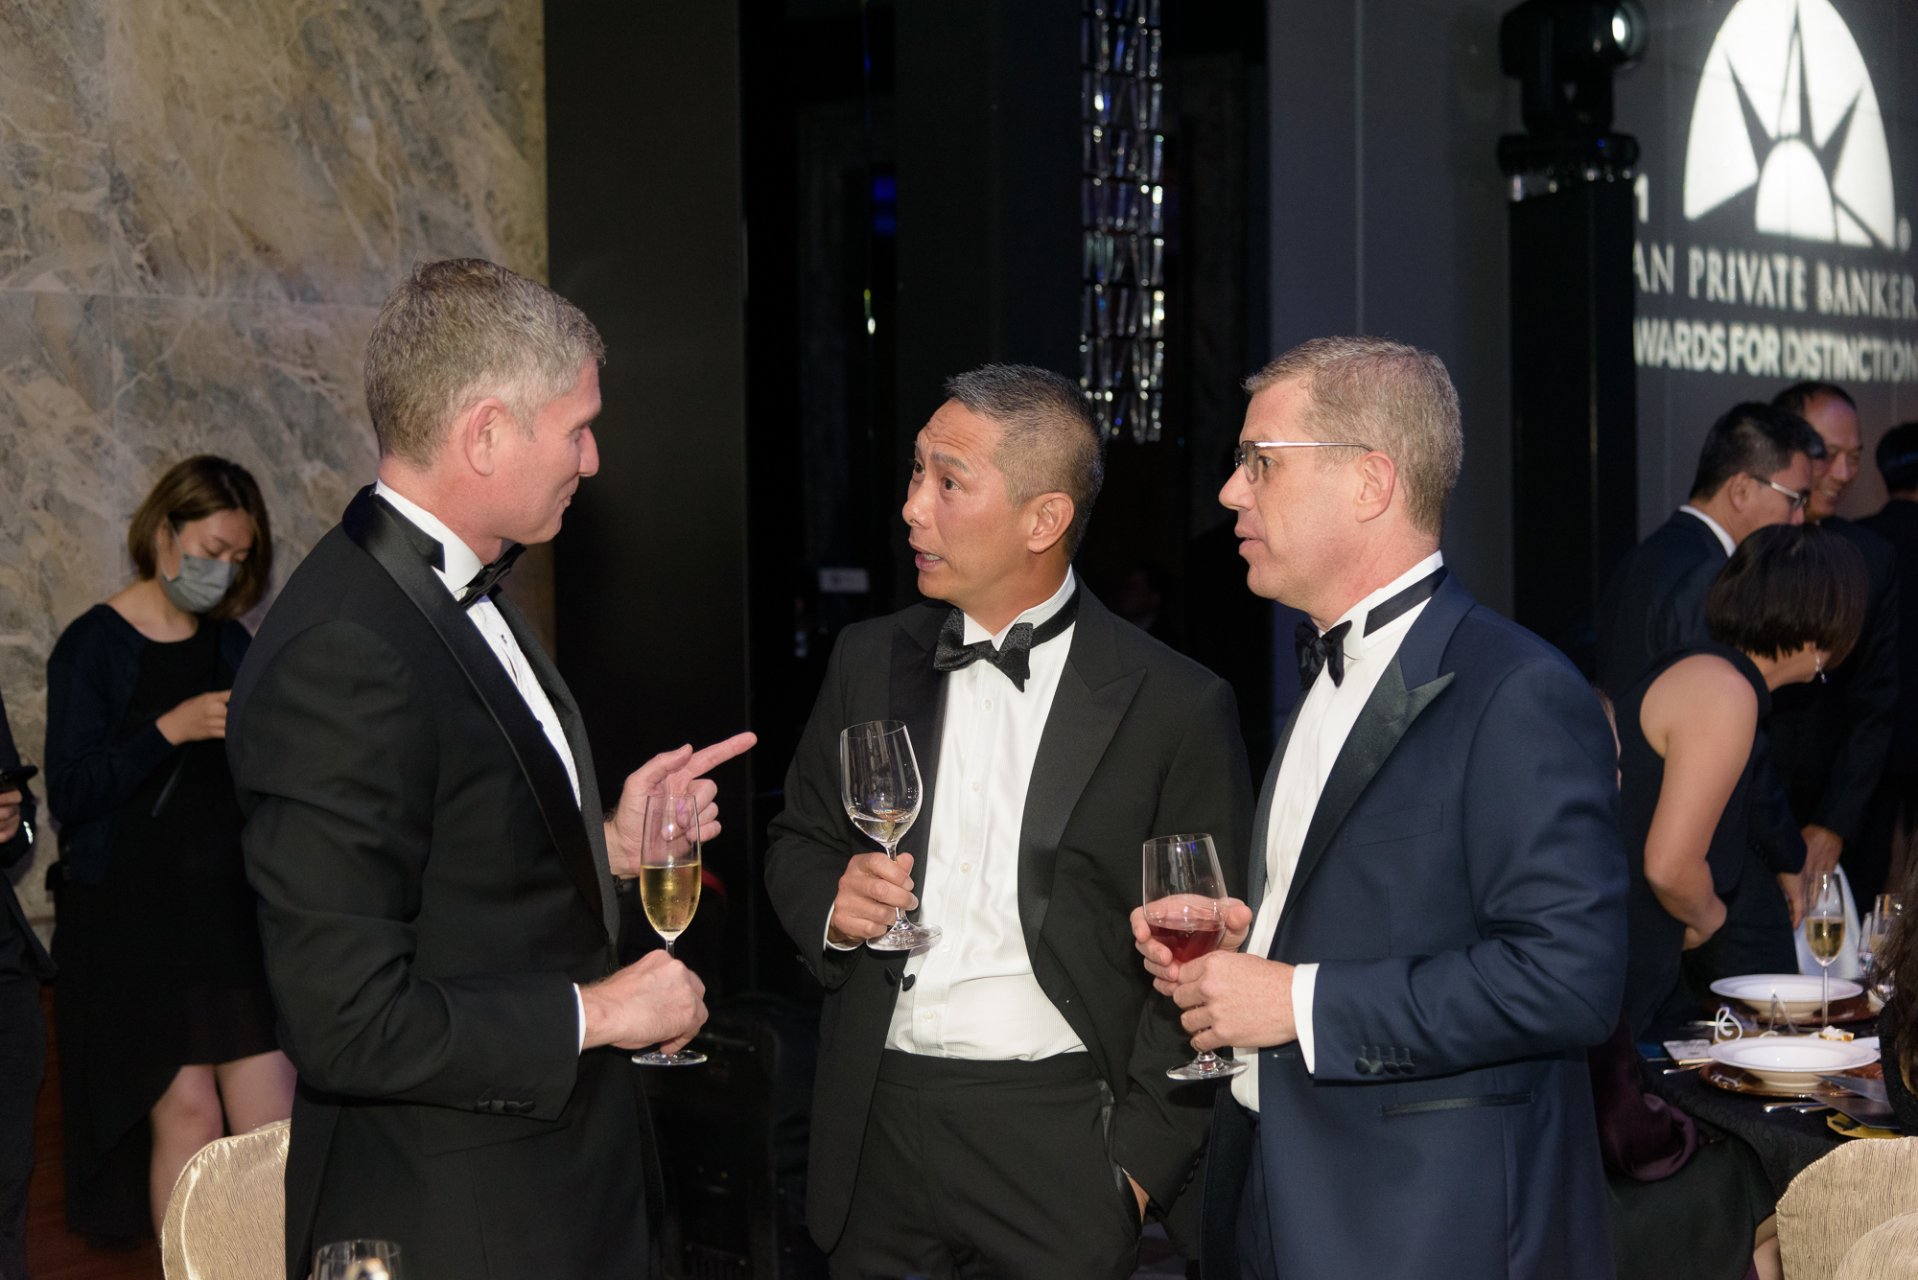 Evening of celebration and networking amongst Asia's leading private banks